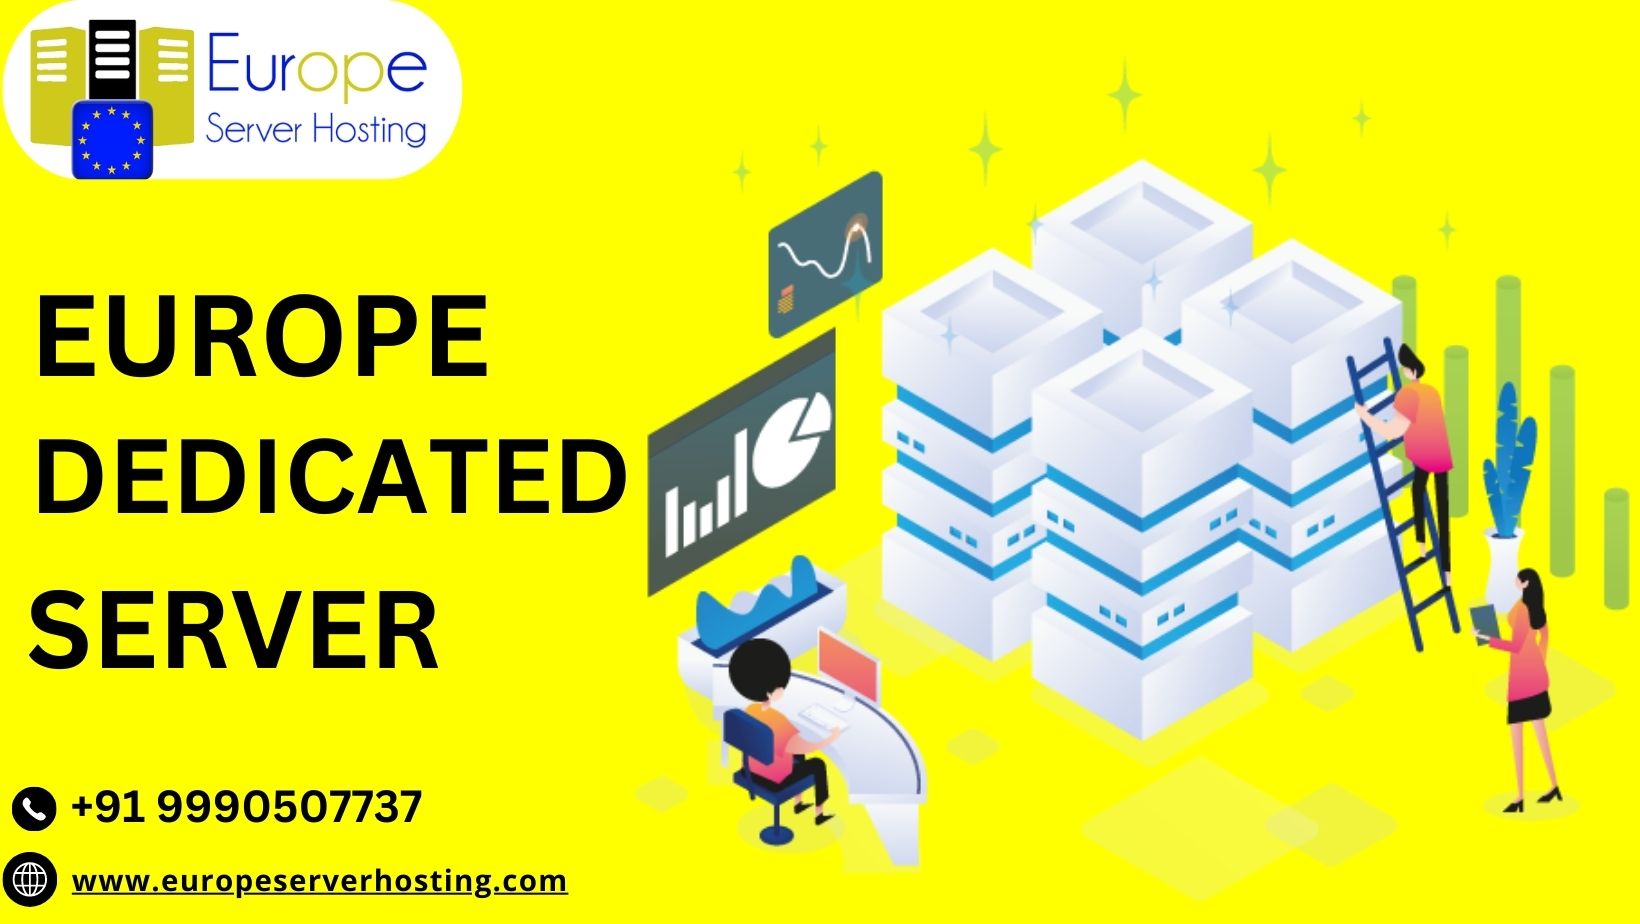 Europe Server Hosting, we pride ourselves on offering top-of-the-line dedicated server solutions that cater to all your business needs.